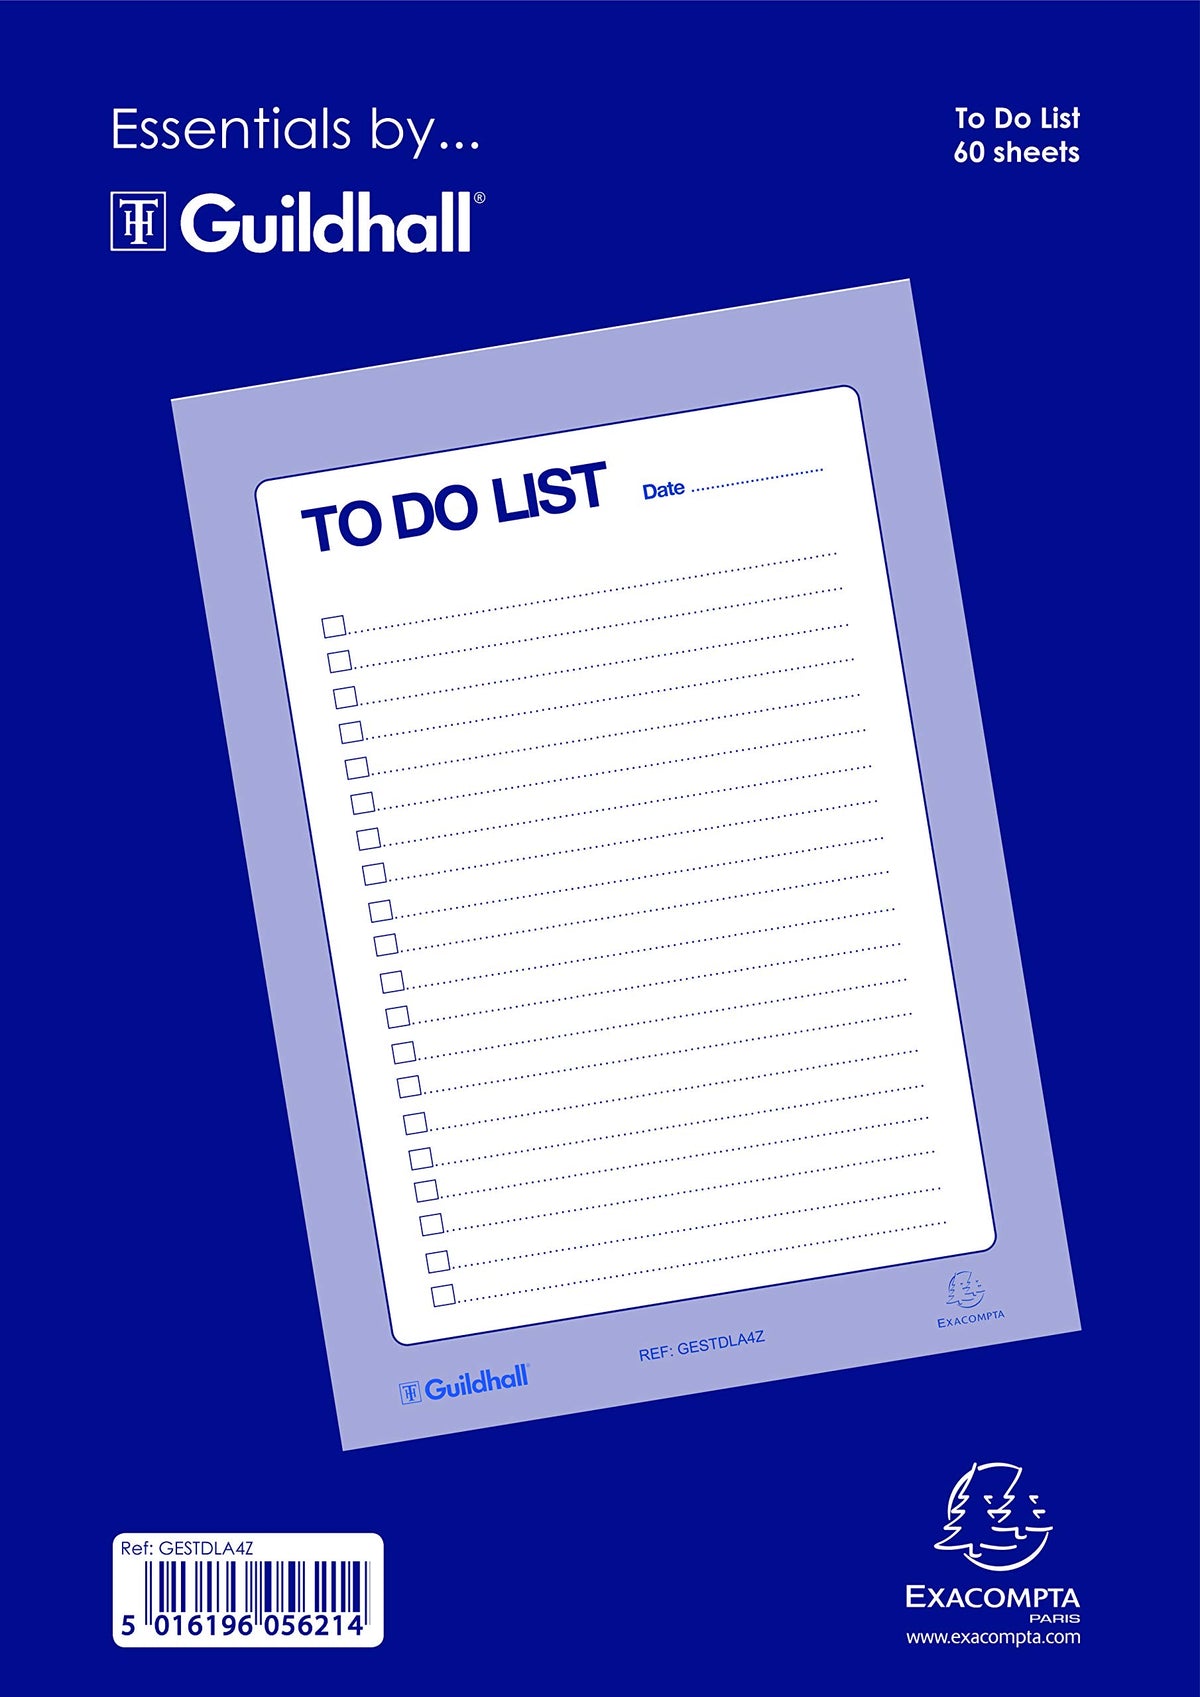 Exacompta - Ref GESTDLA4Z - Guildhall - Essentials To Do List Pad, A4, 60 Sheets, Pre-Ruled for Dates, Tick Boxes & Lines, Glue Bound Head for Easy Removal - Blue/White